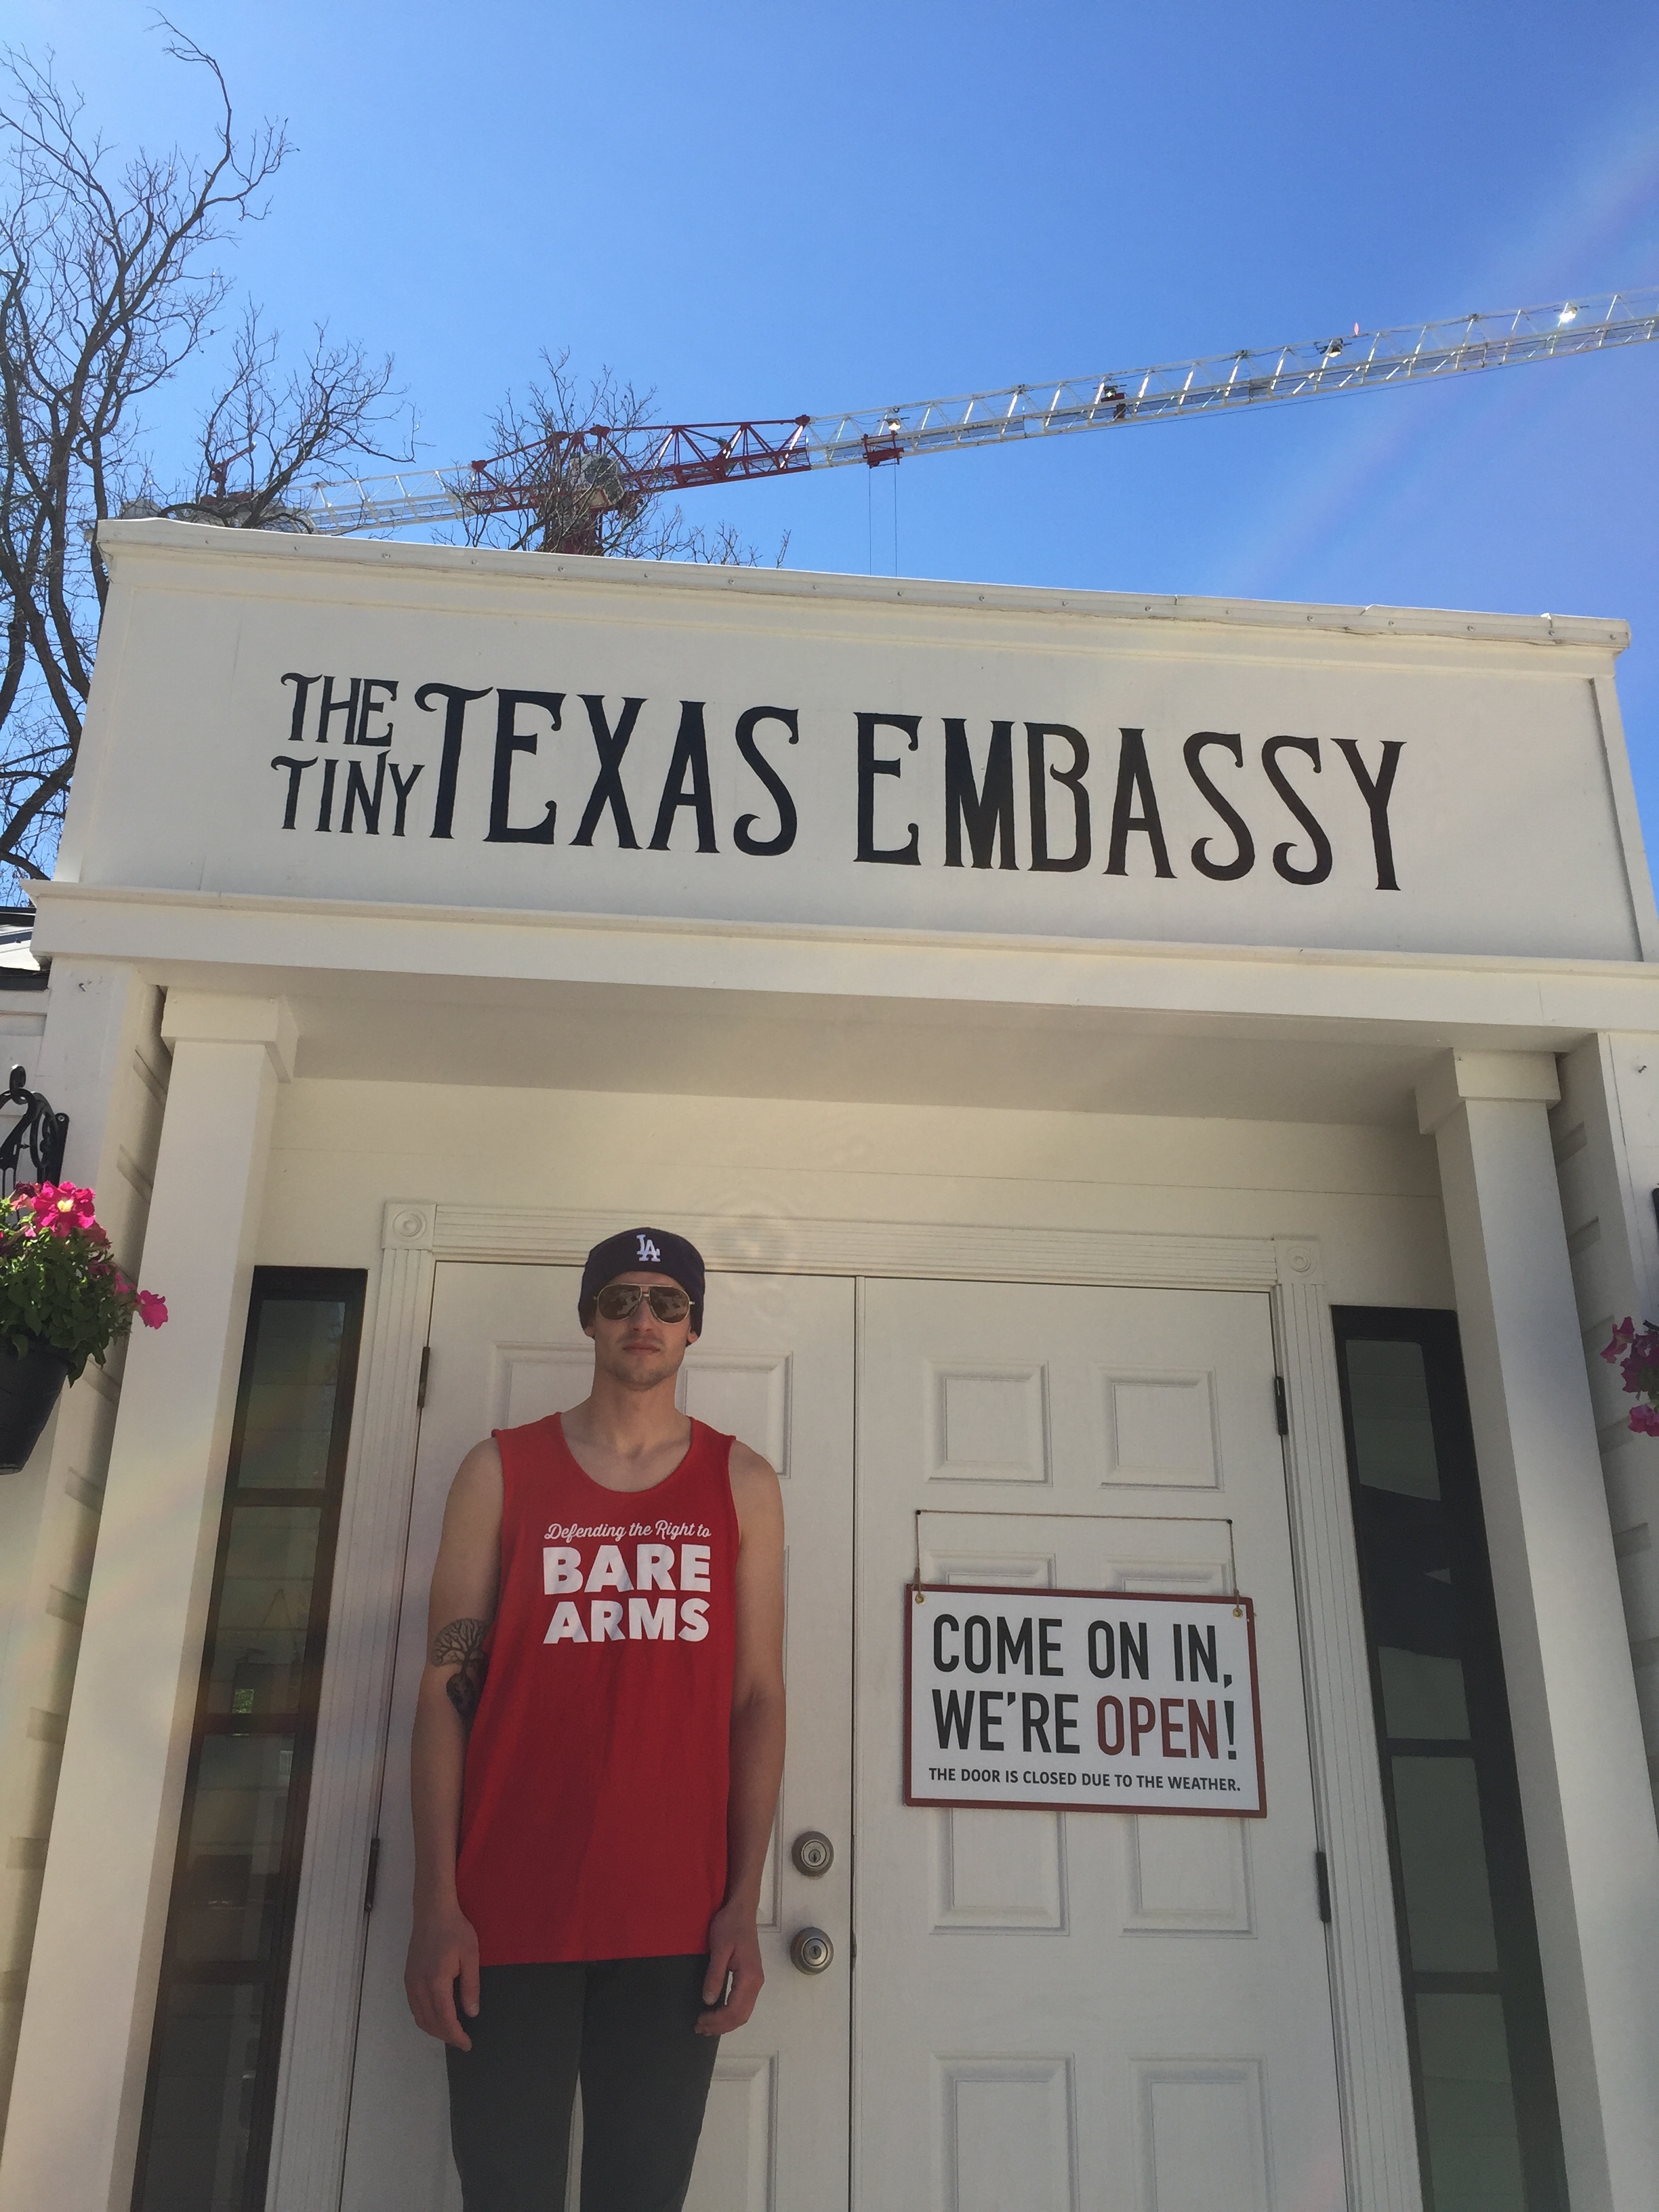 Jake Beam taking a picture at the The Tiny Texas Embassy while wearing his Harris Media "Defending the right to bare arms" shirt. 